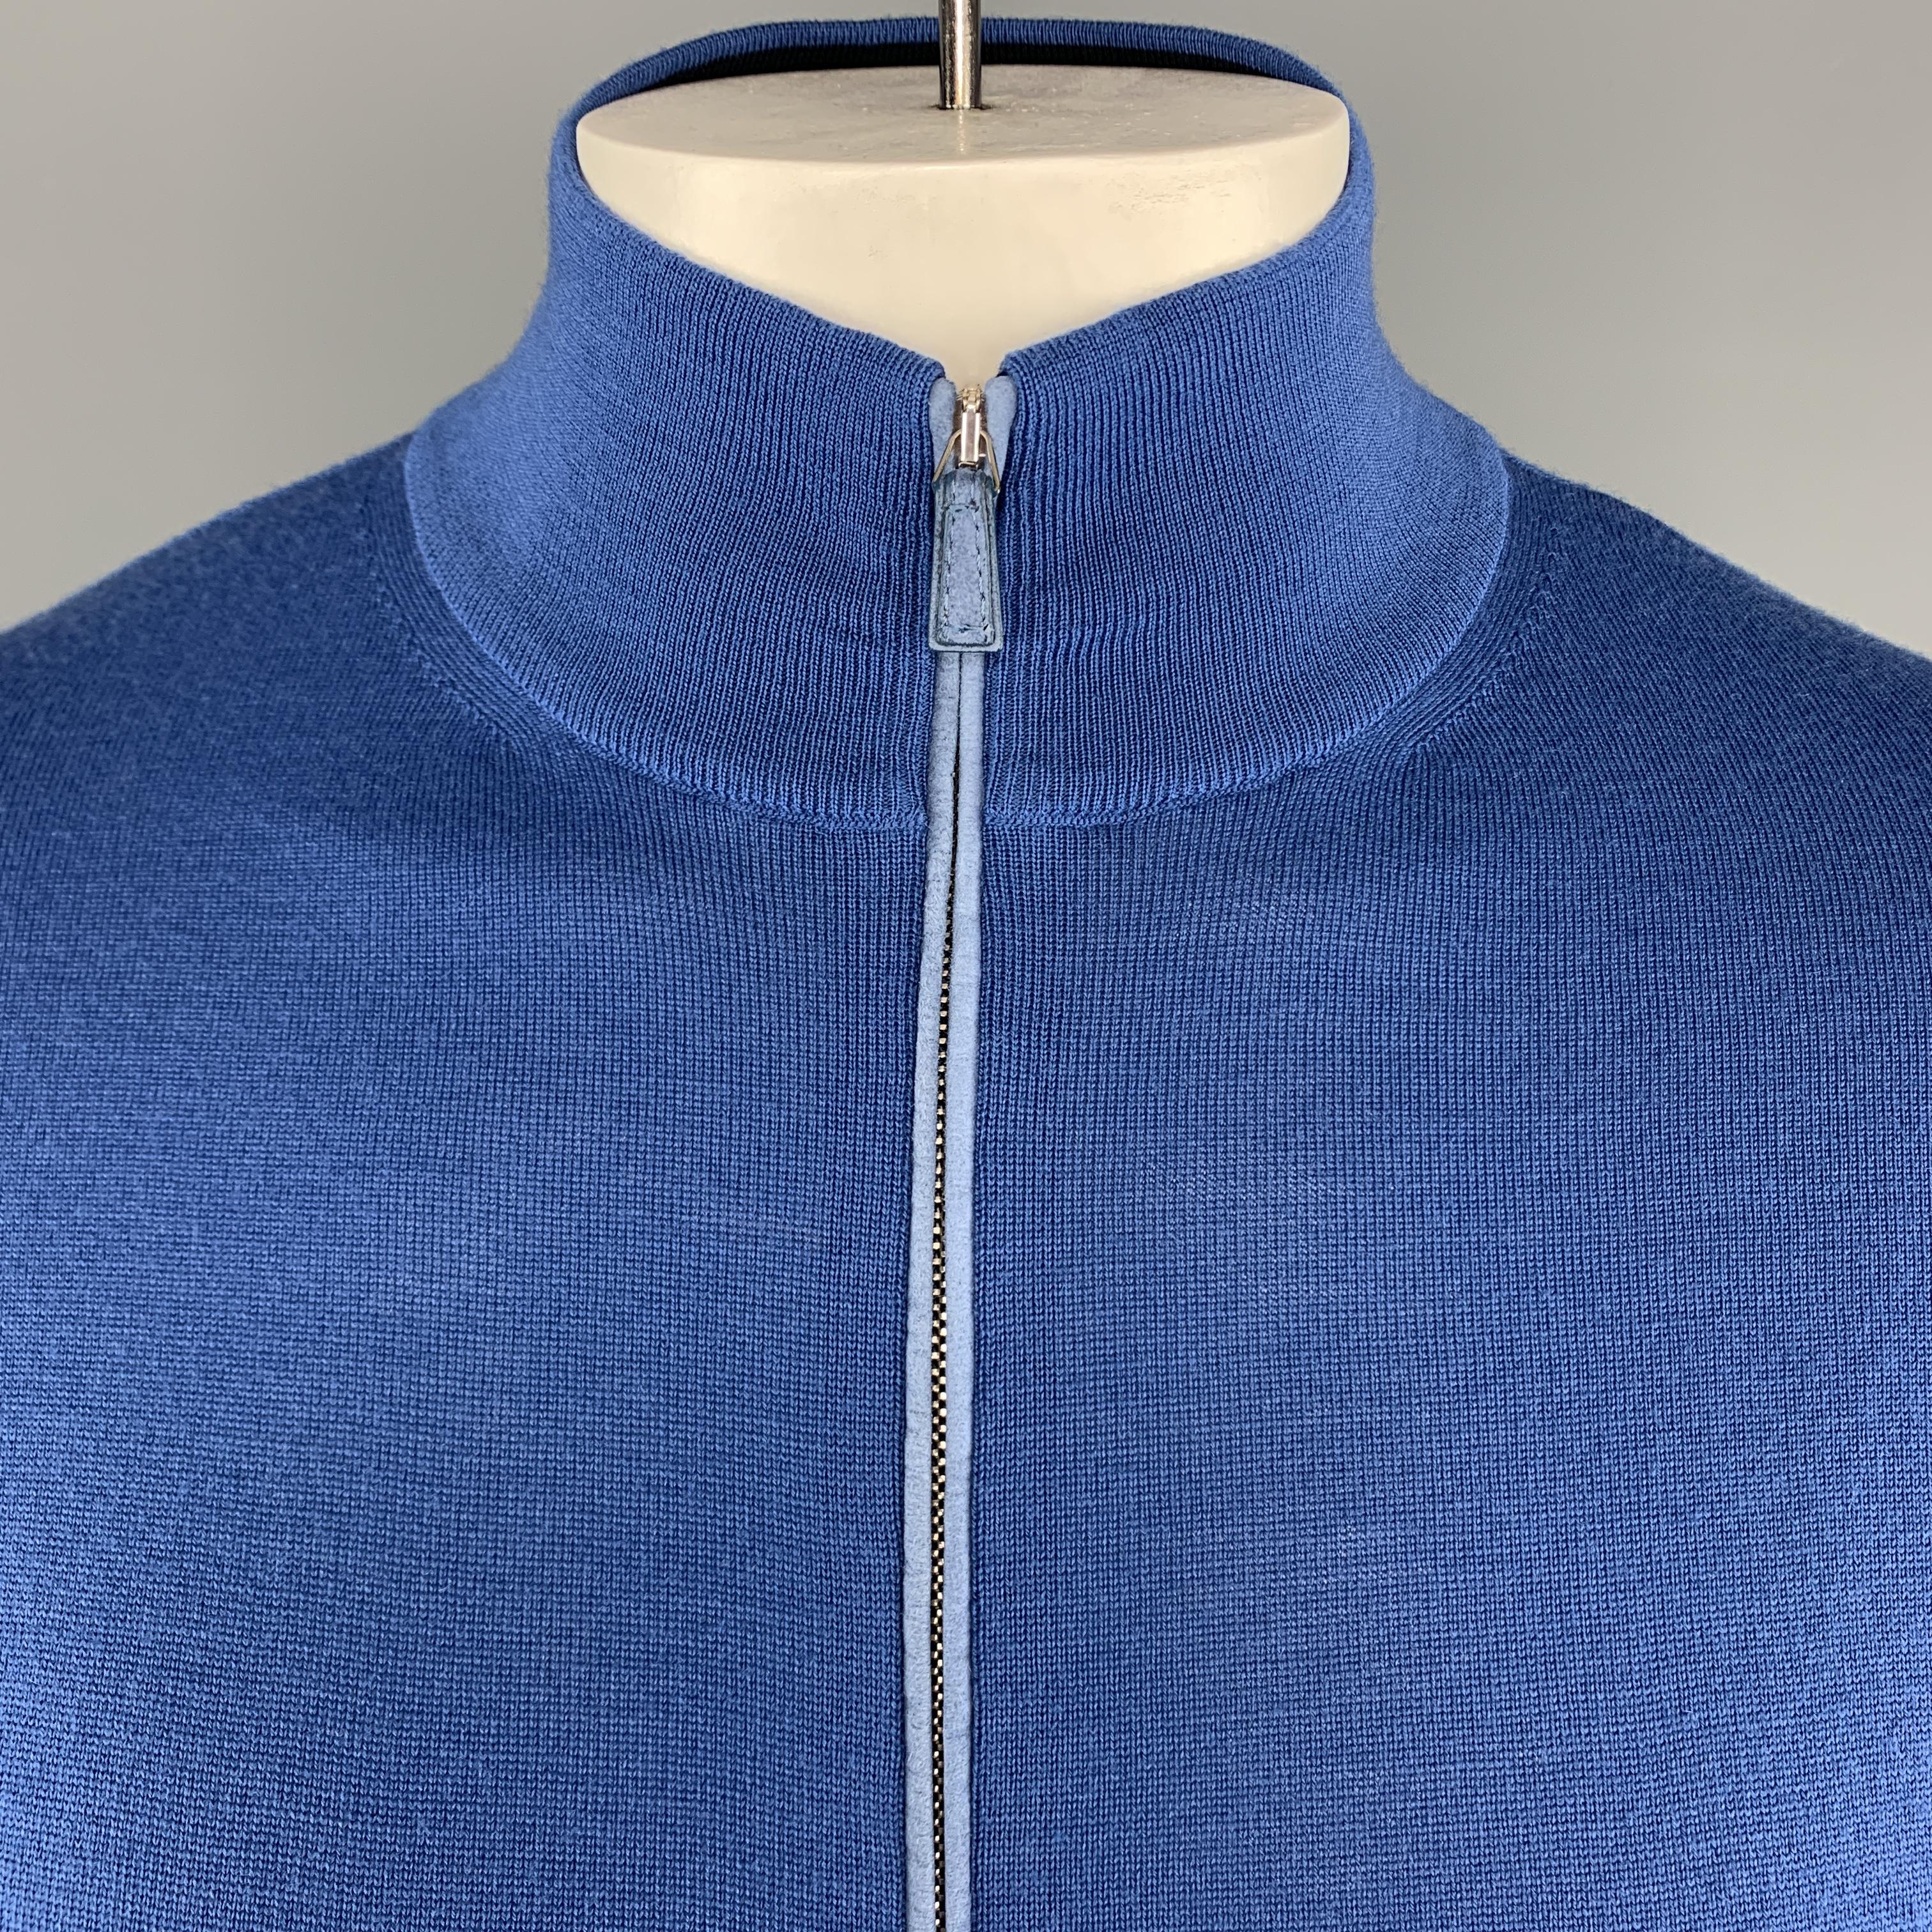 ERMENEGILDO ZEGNA Pullover Sweater comes in a blue tone in a solid wool / cashmere material, with a high collar, zipped front, long sleeves and ribbed cuffs and hem. Made in Italy.
 
Excellent Pre-Owned Condition.
Marked: L
 
Measurements:
